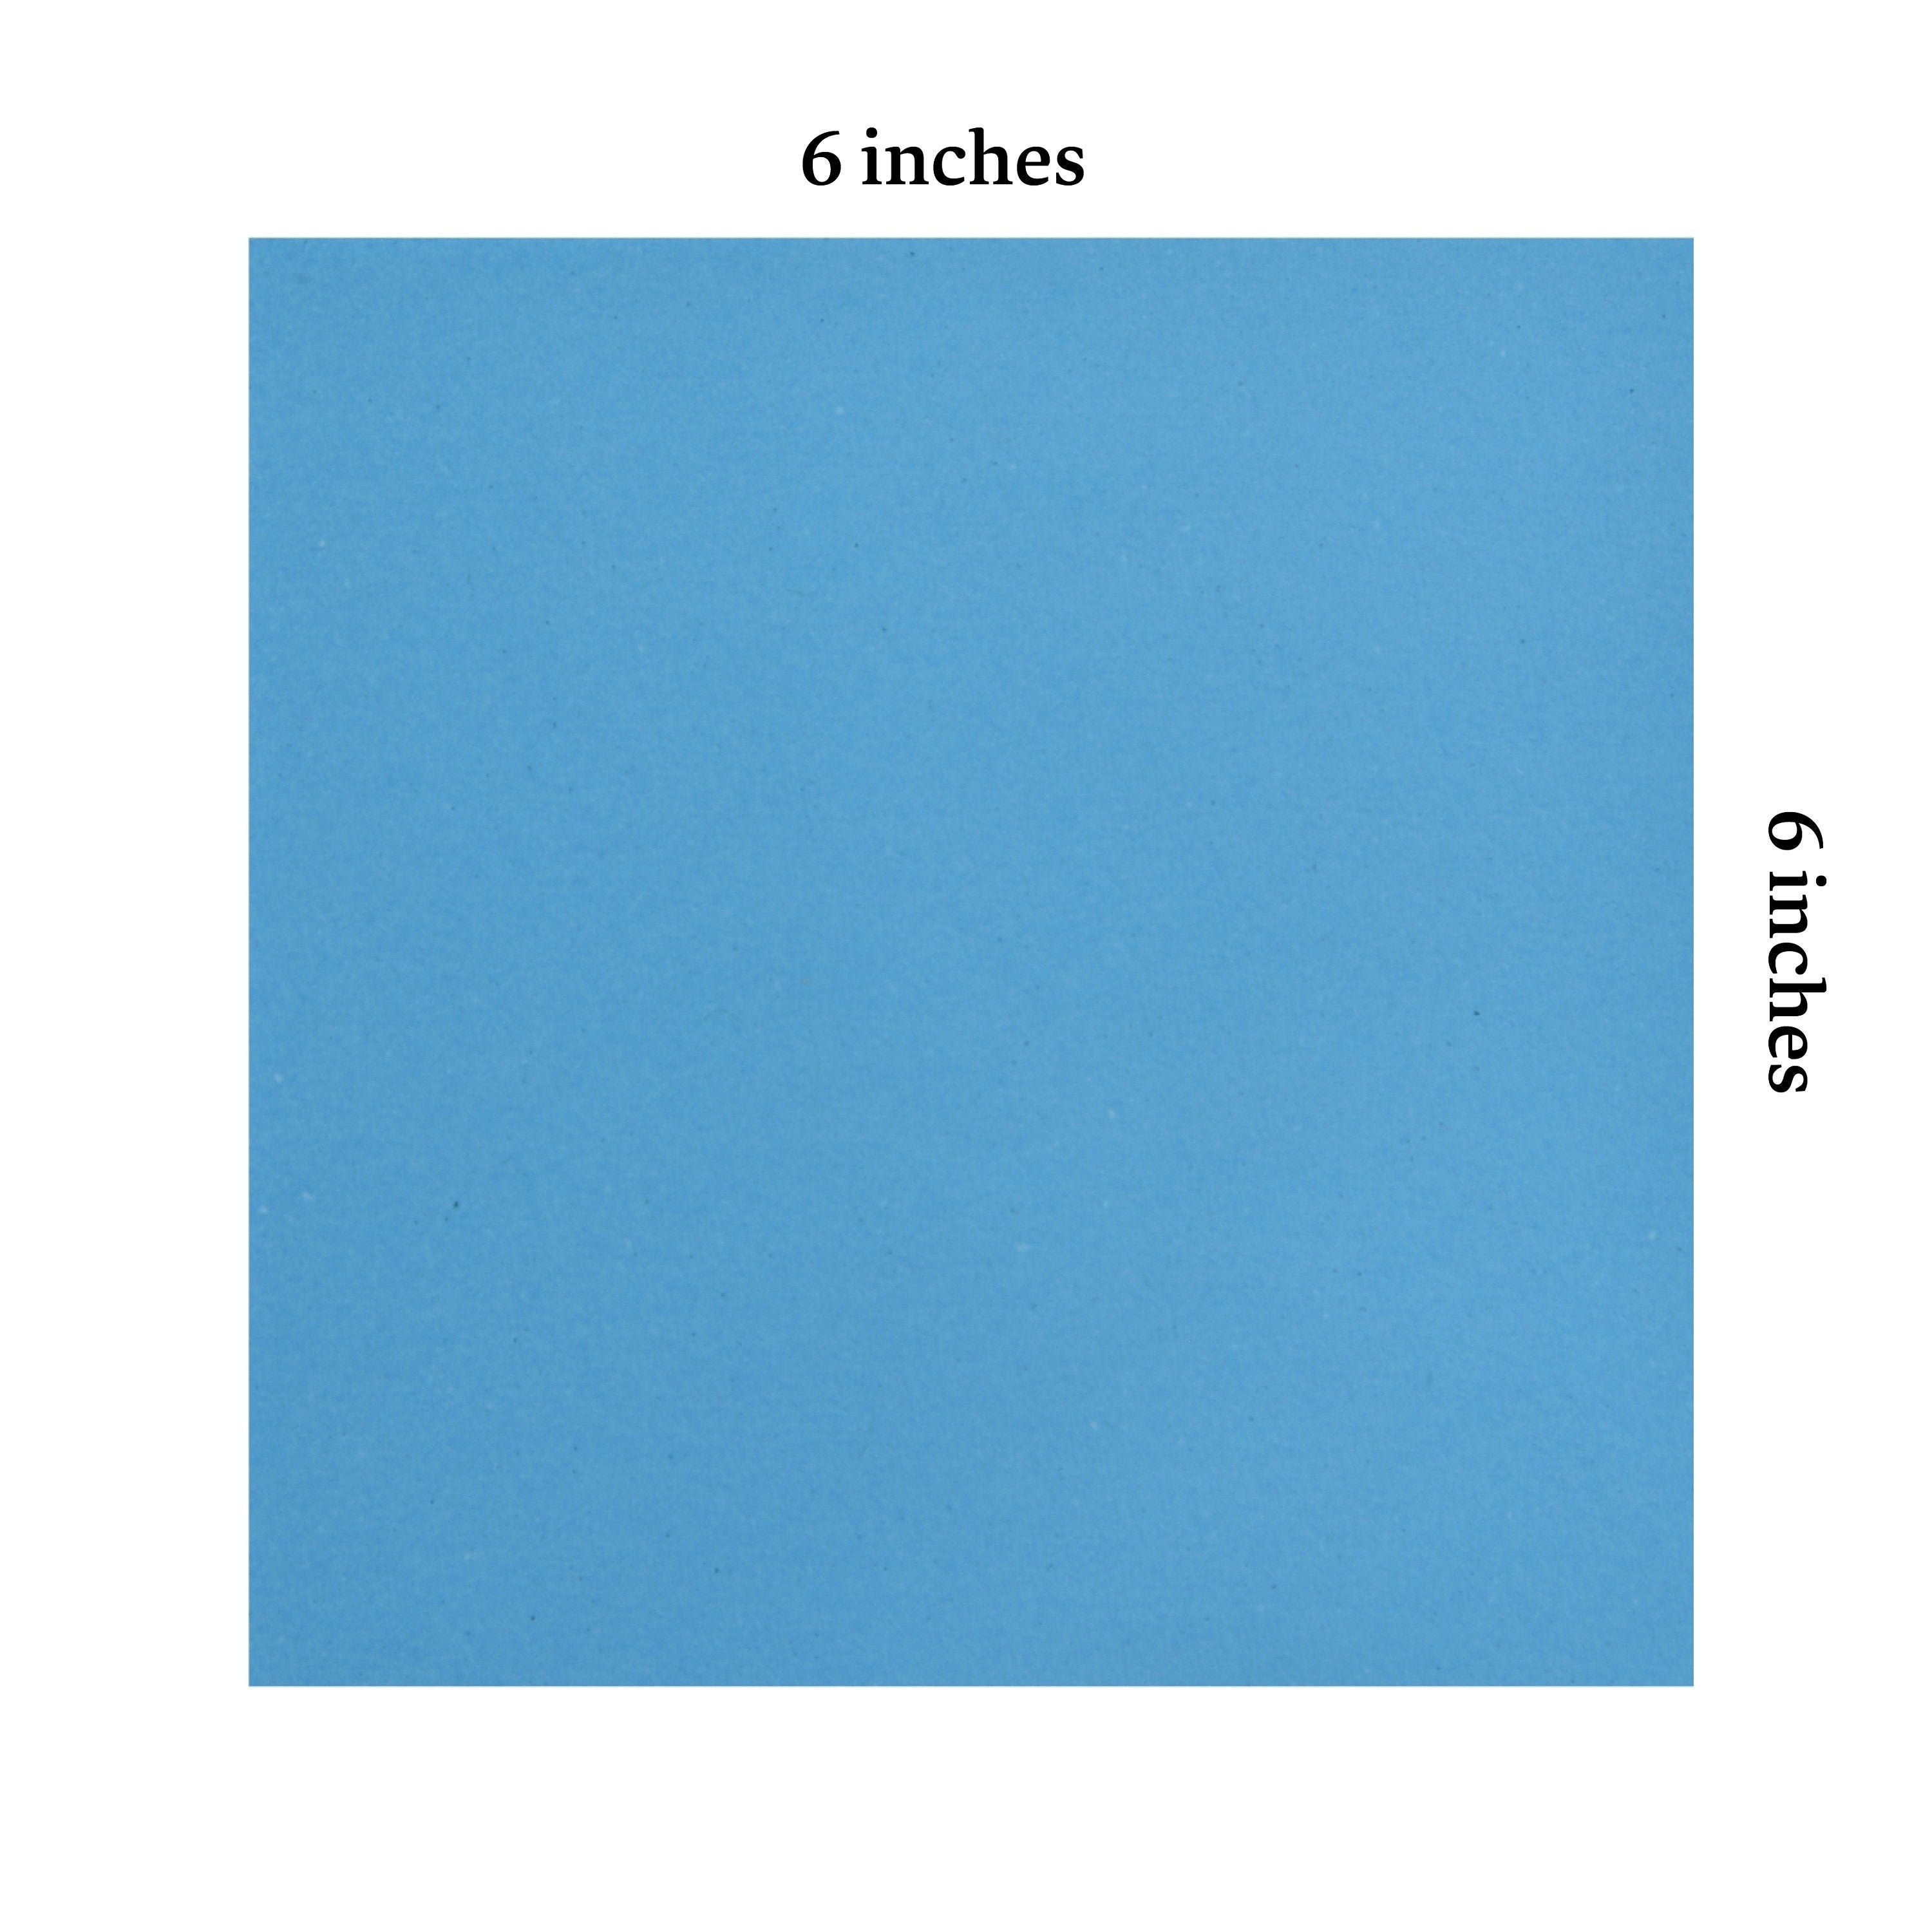 100 Origami Paper Sheets 6x6 inches Square Paper Pack S17